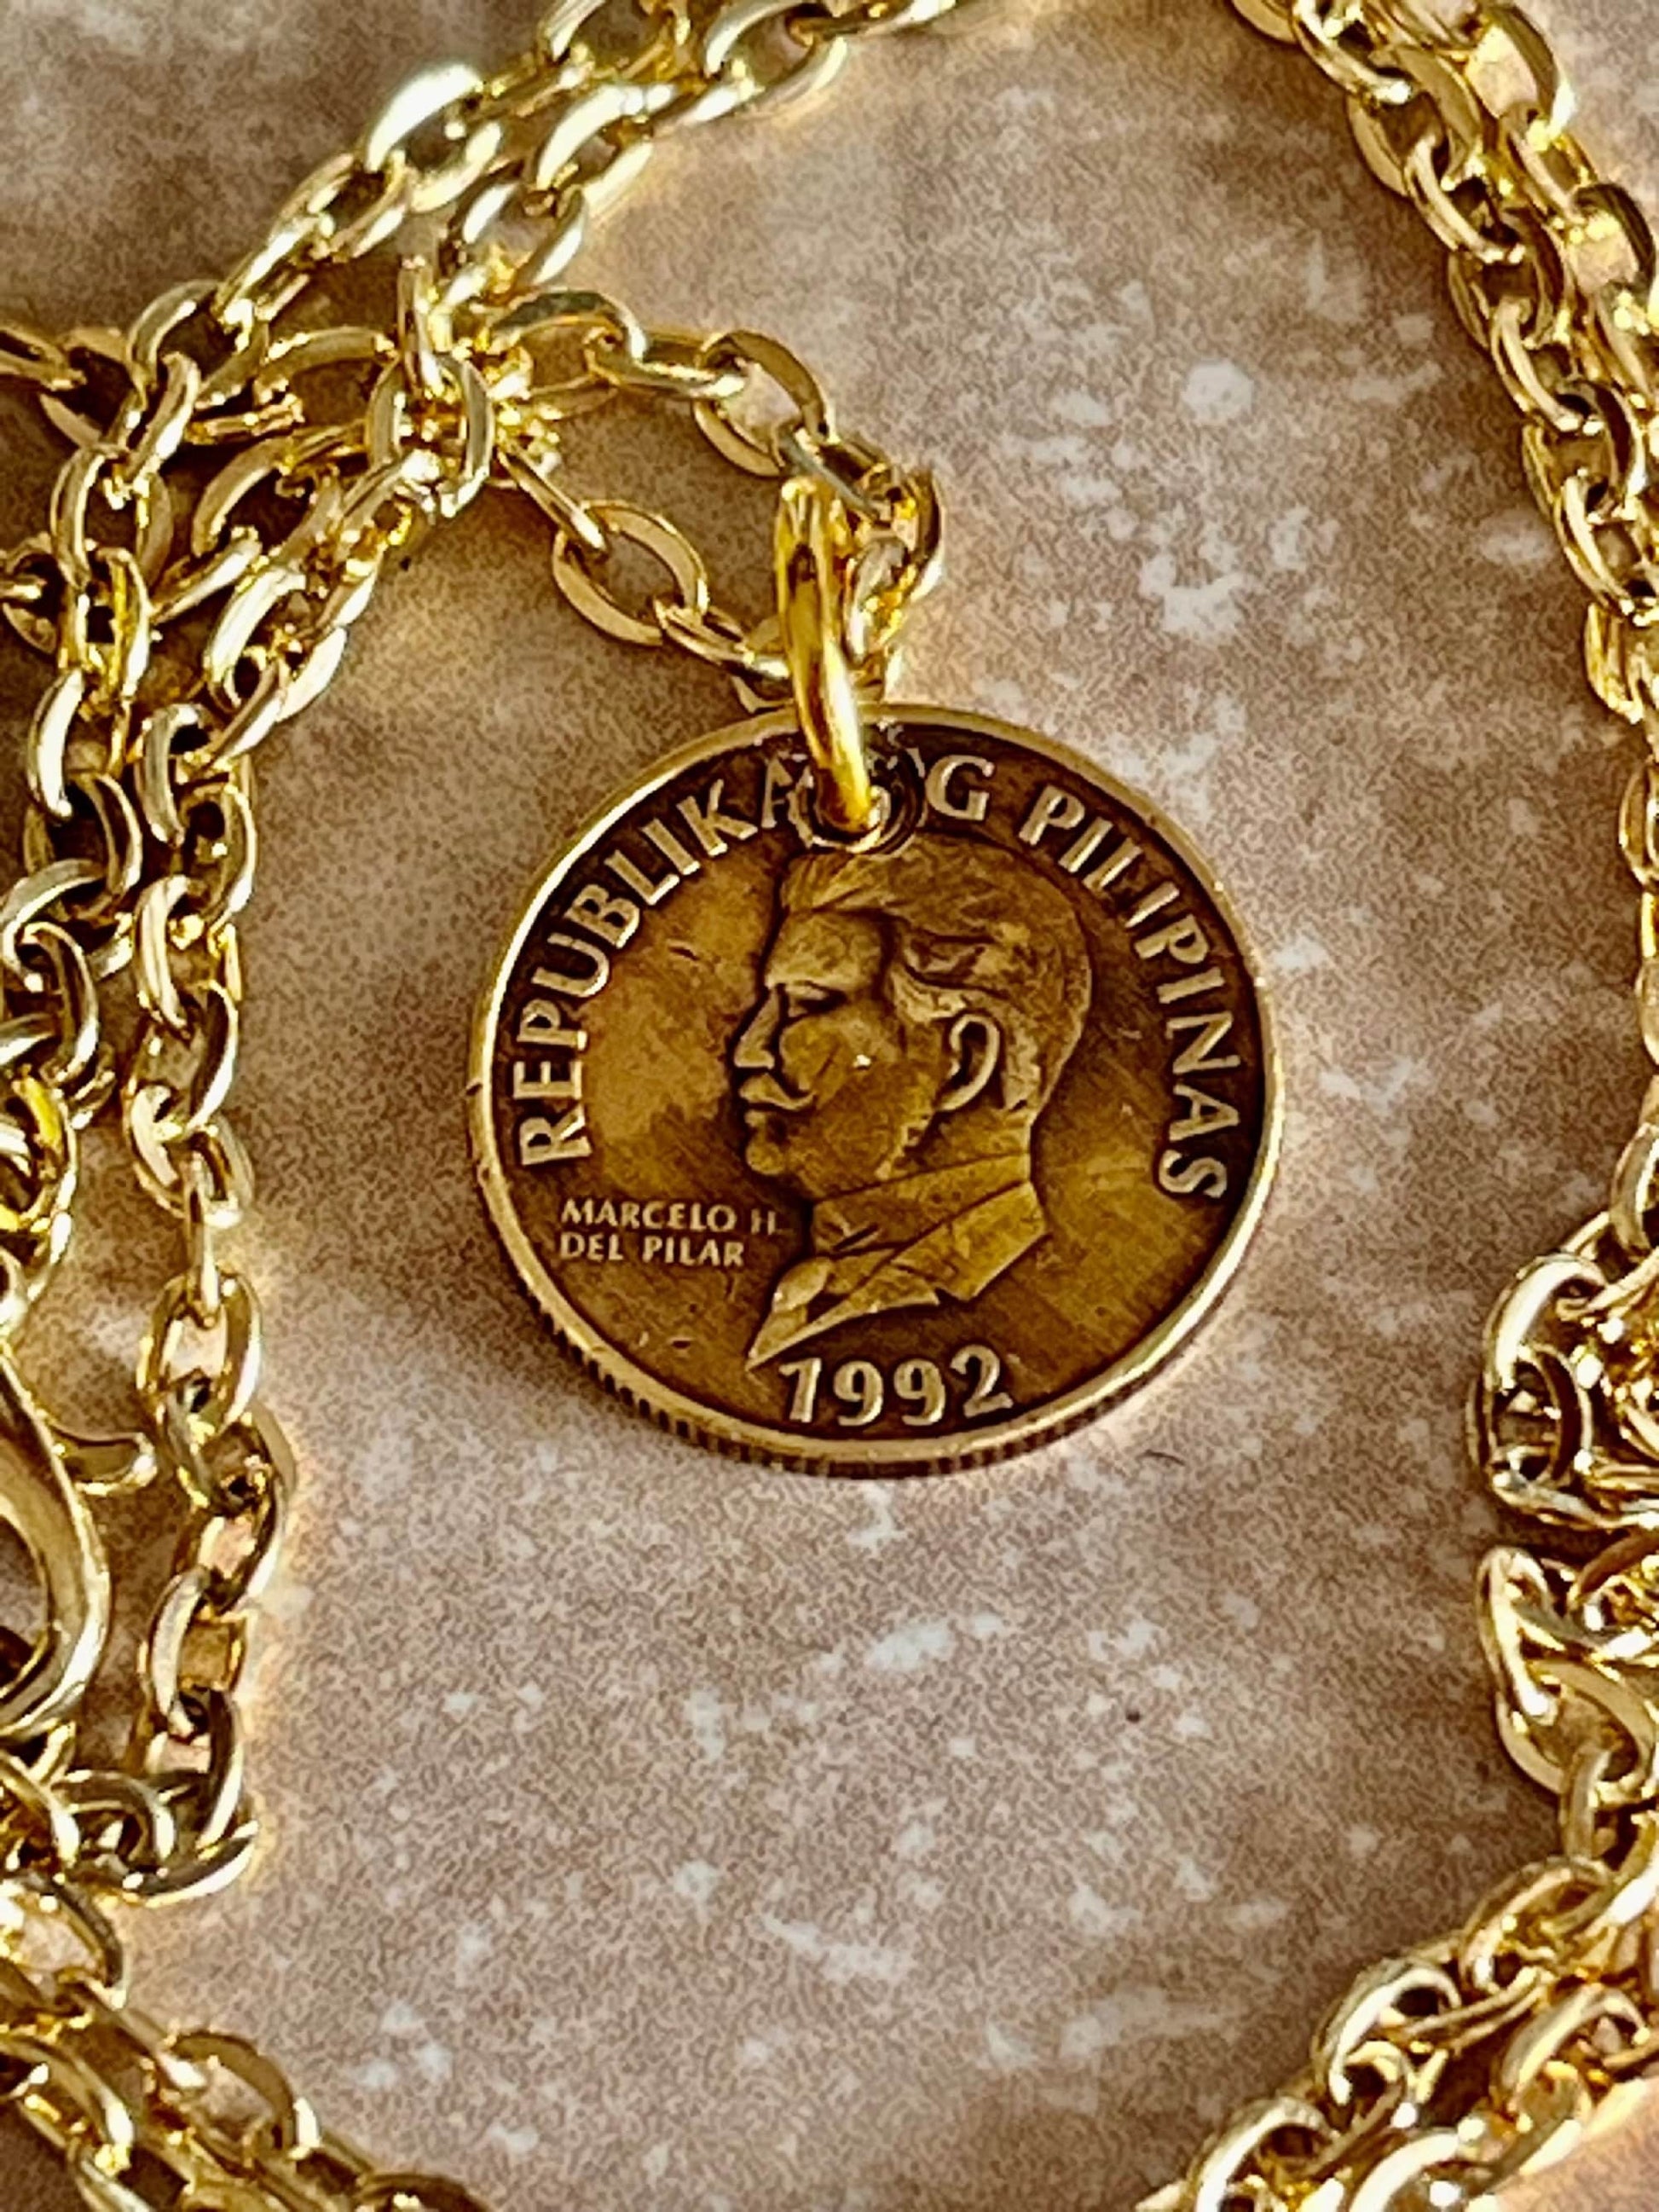 Philippines Coin Pendant Necklace Pilipinas 50 Sentimo Personal Vintage Handmade Jewelry Gift Friend Charm For Him Her World Coin Collector